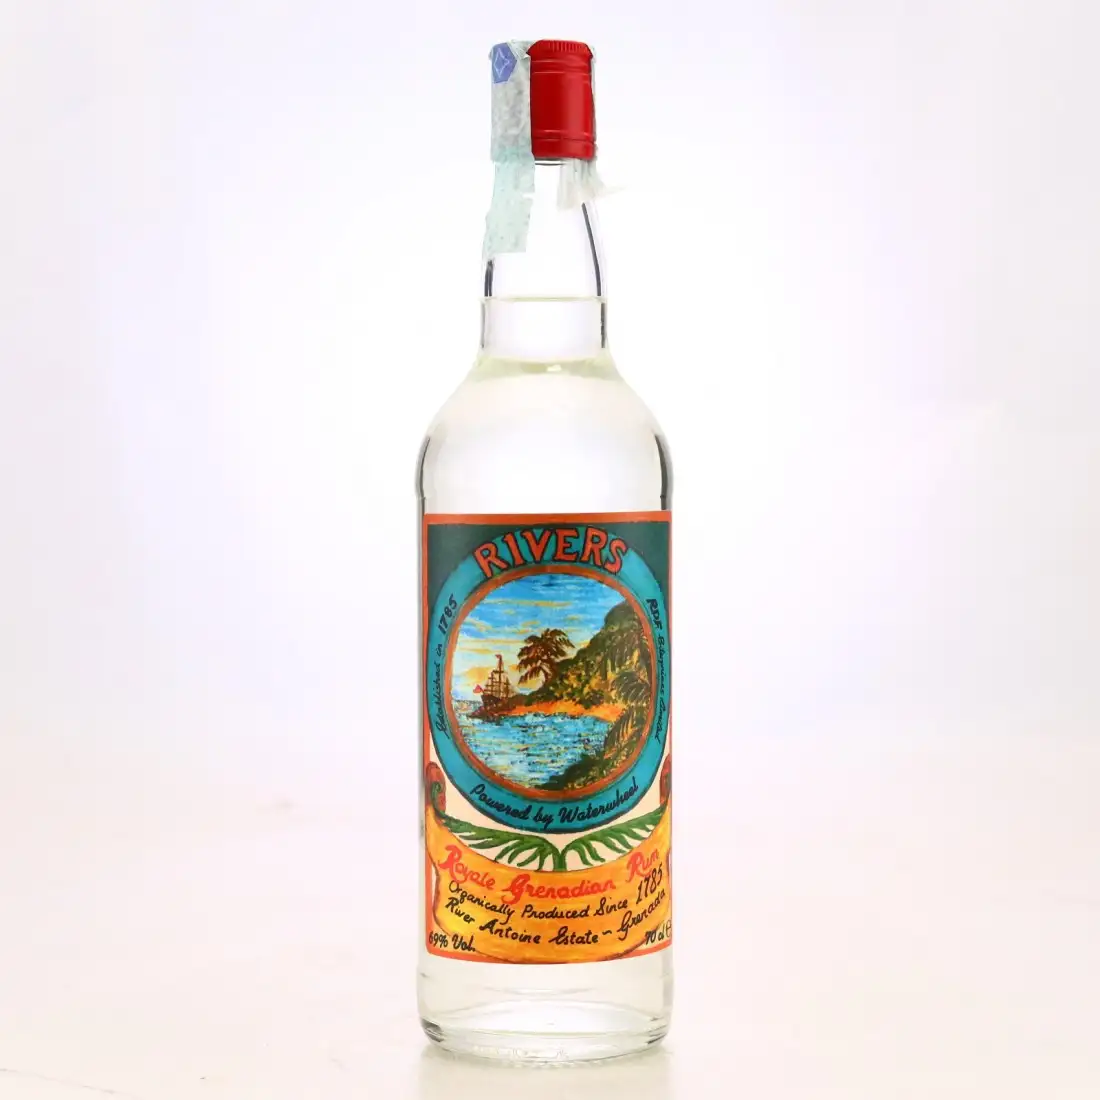 Image of the front of the bottle of the rum Rivers Royal Grenadian Rum